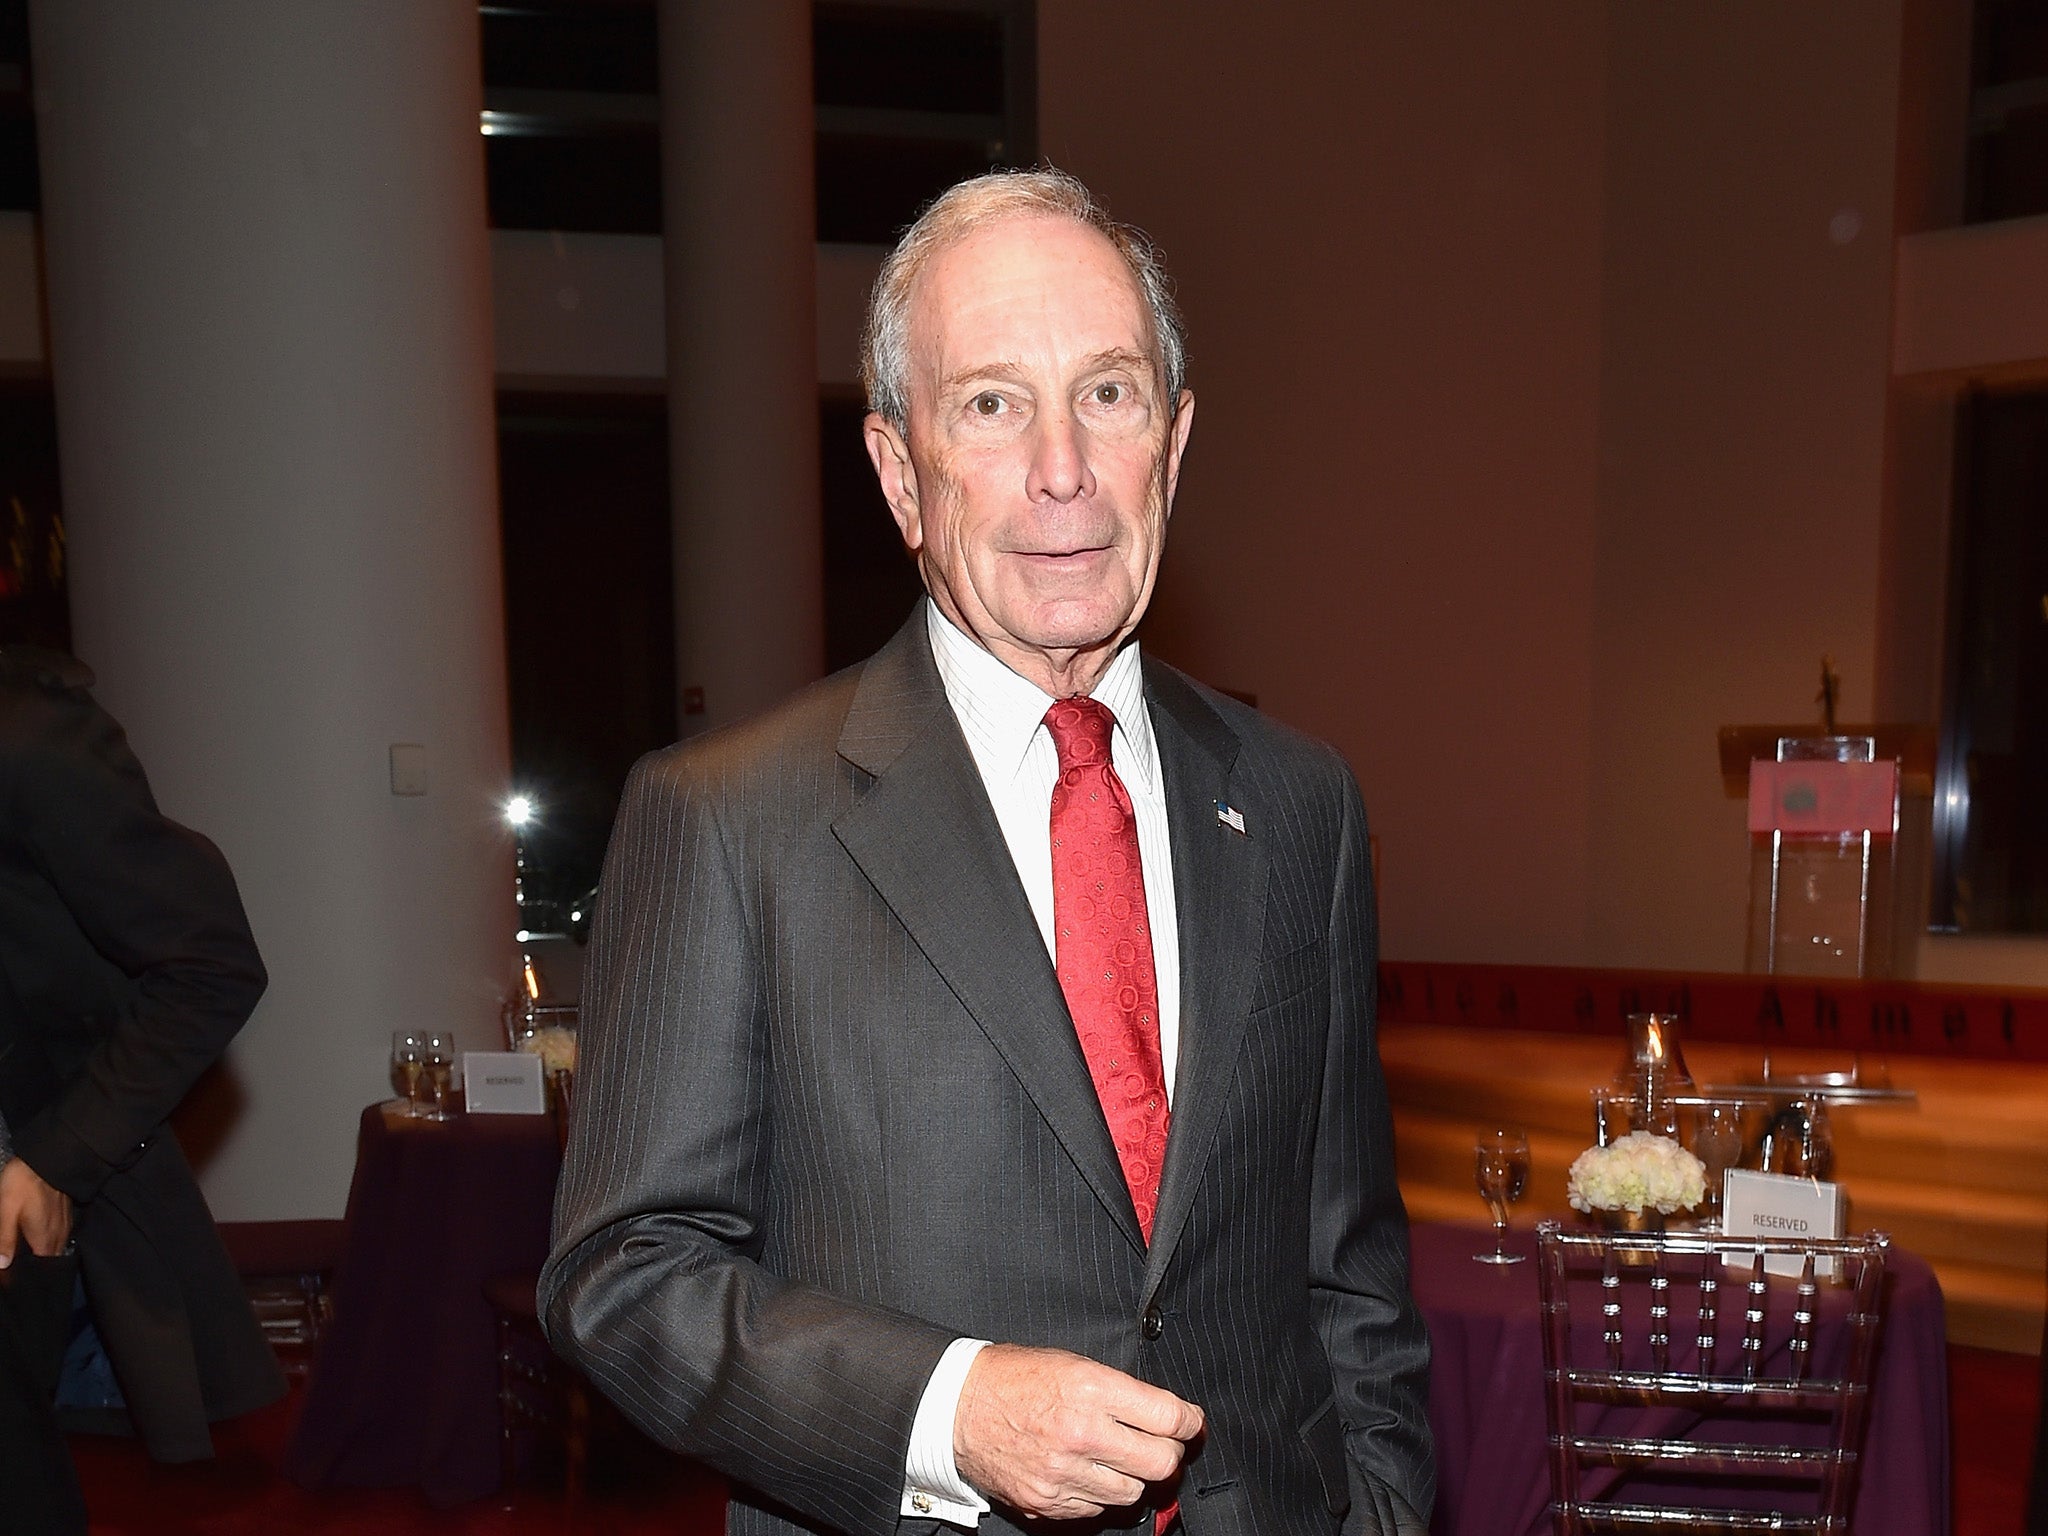 &#13;
Michael Bloomberg is one the prominent Jewish figures who has had his name put into the database &#13;